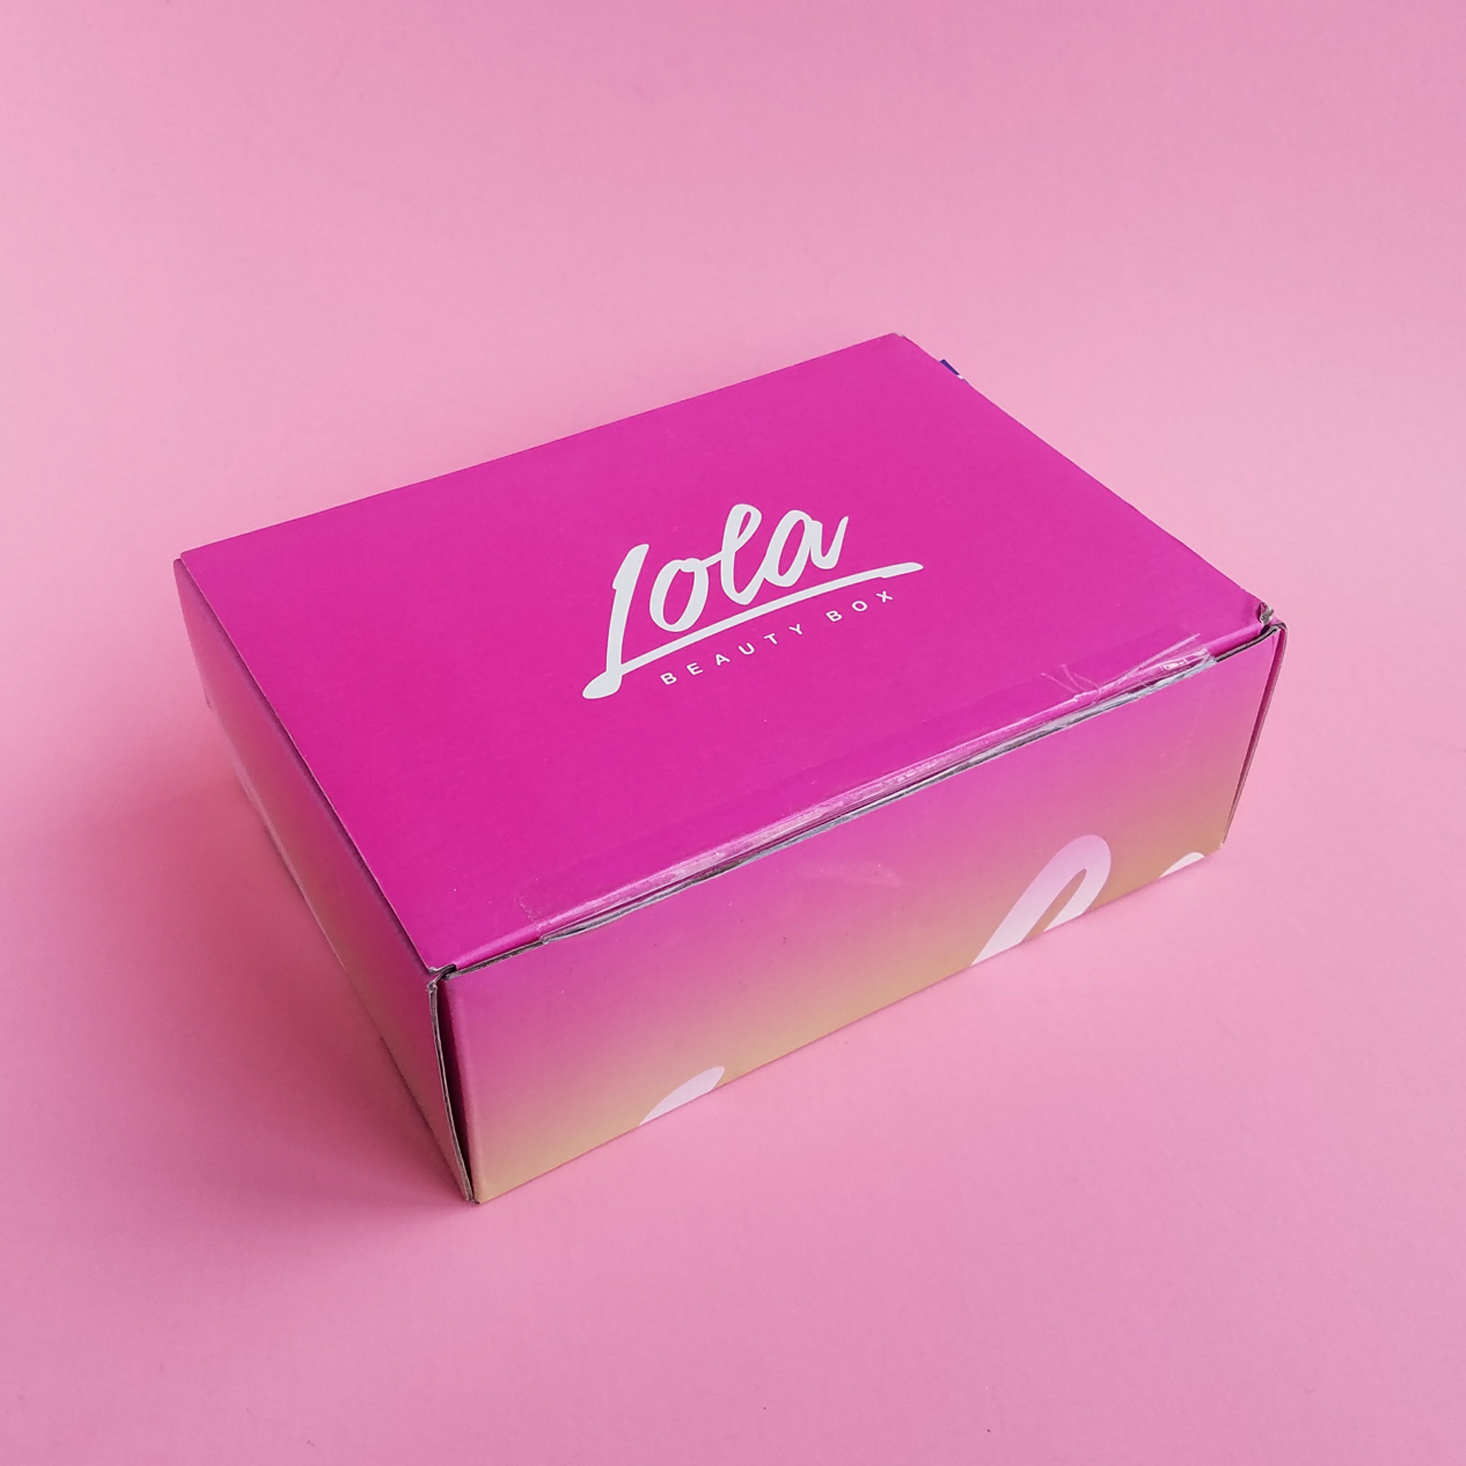 Lola Beauty Box Subscription Review + Coupon – September 2017